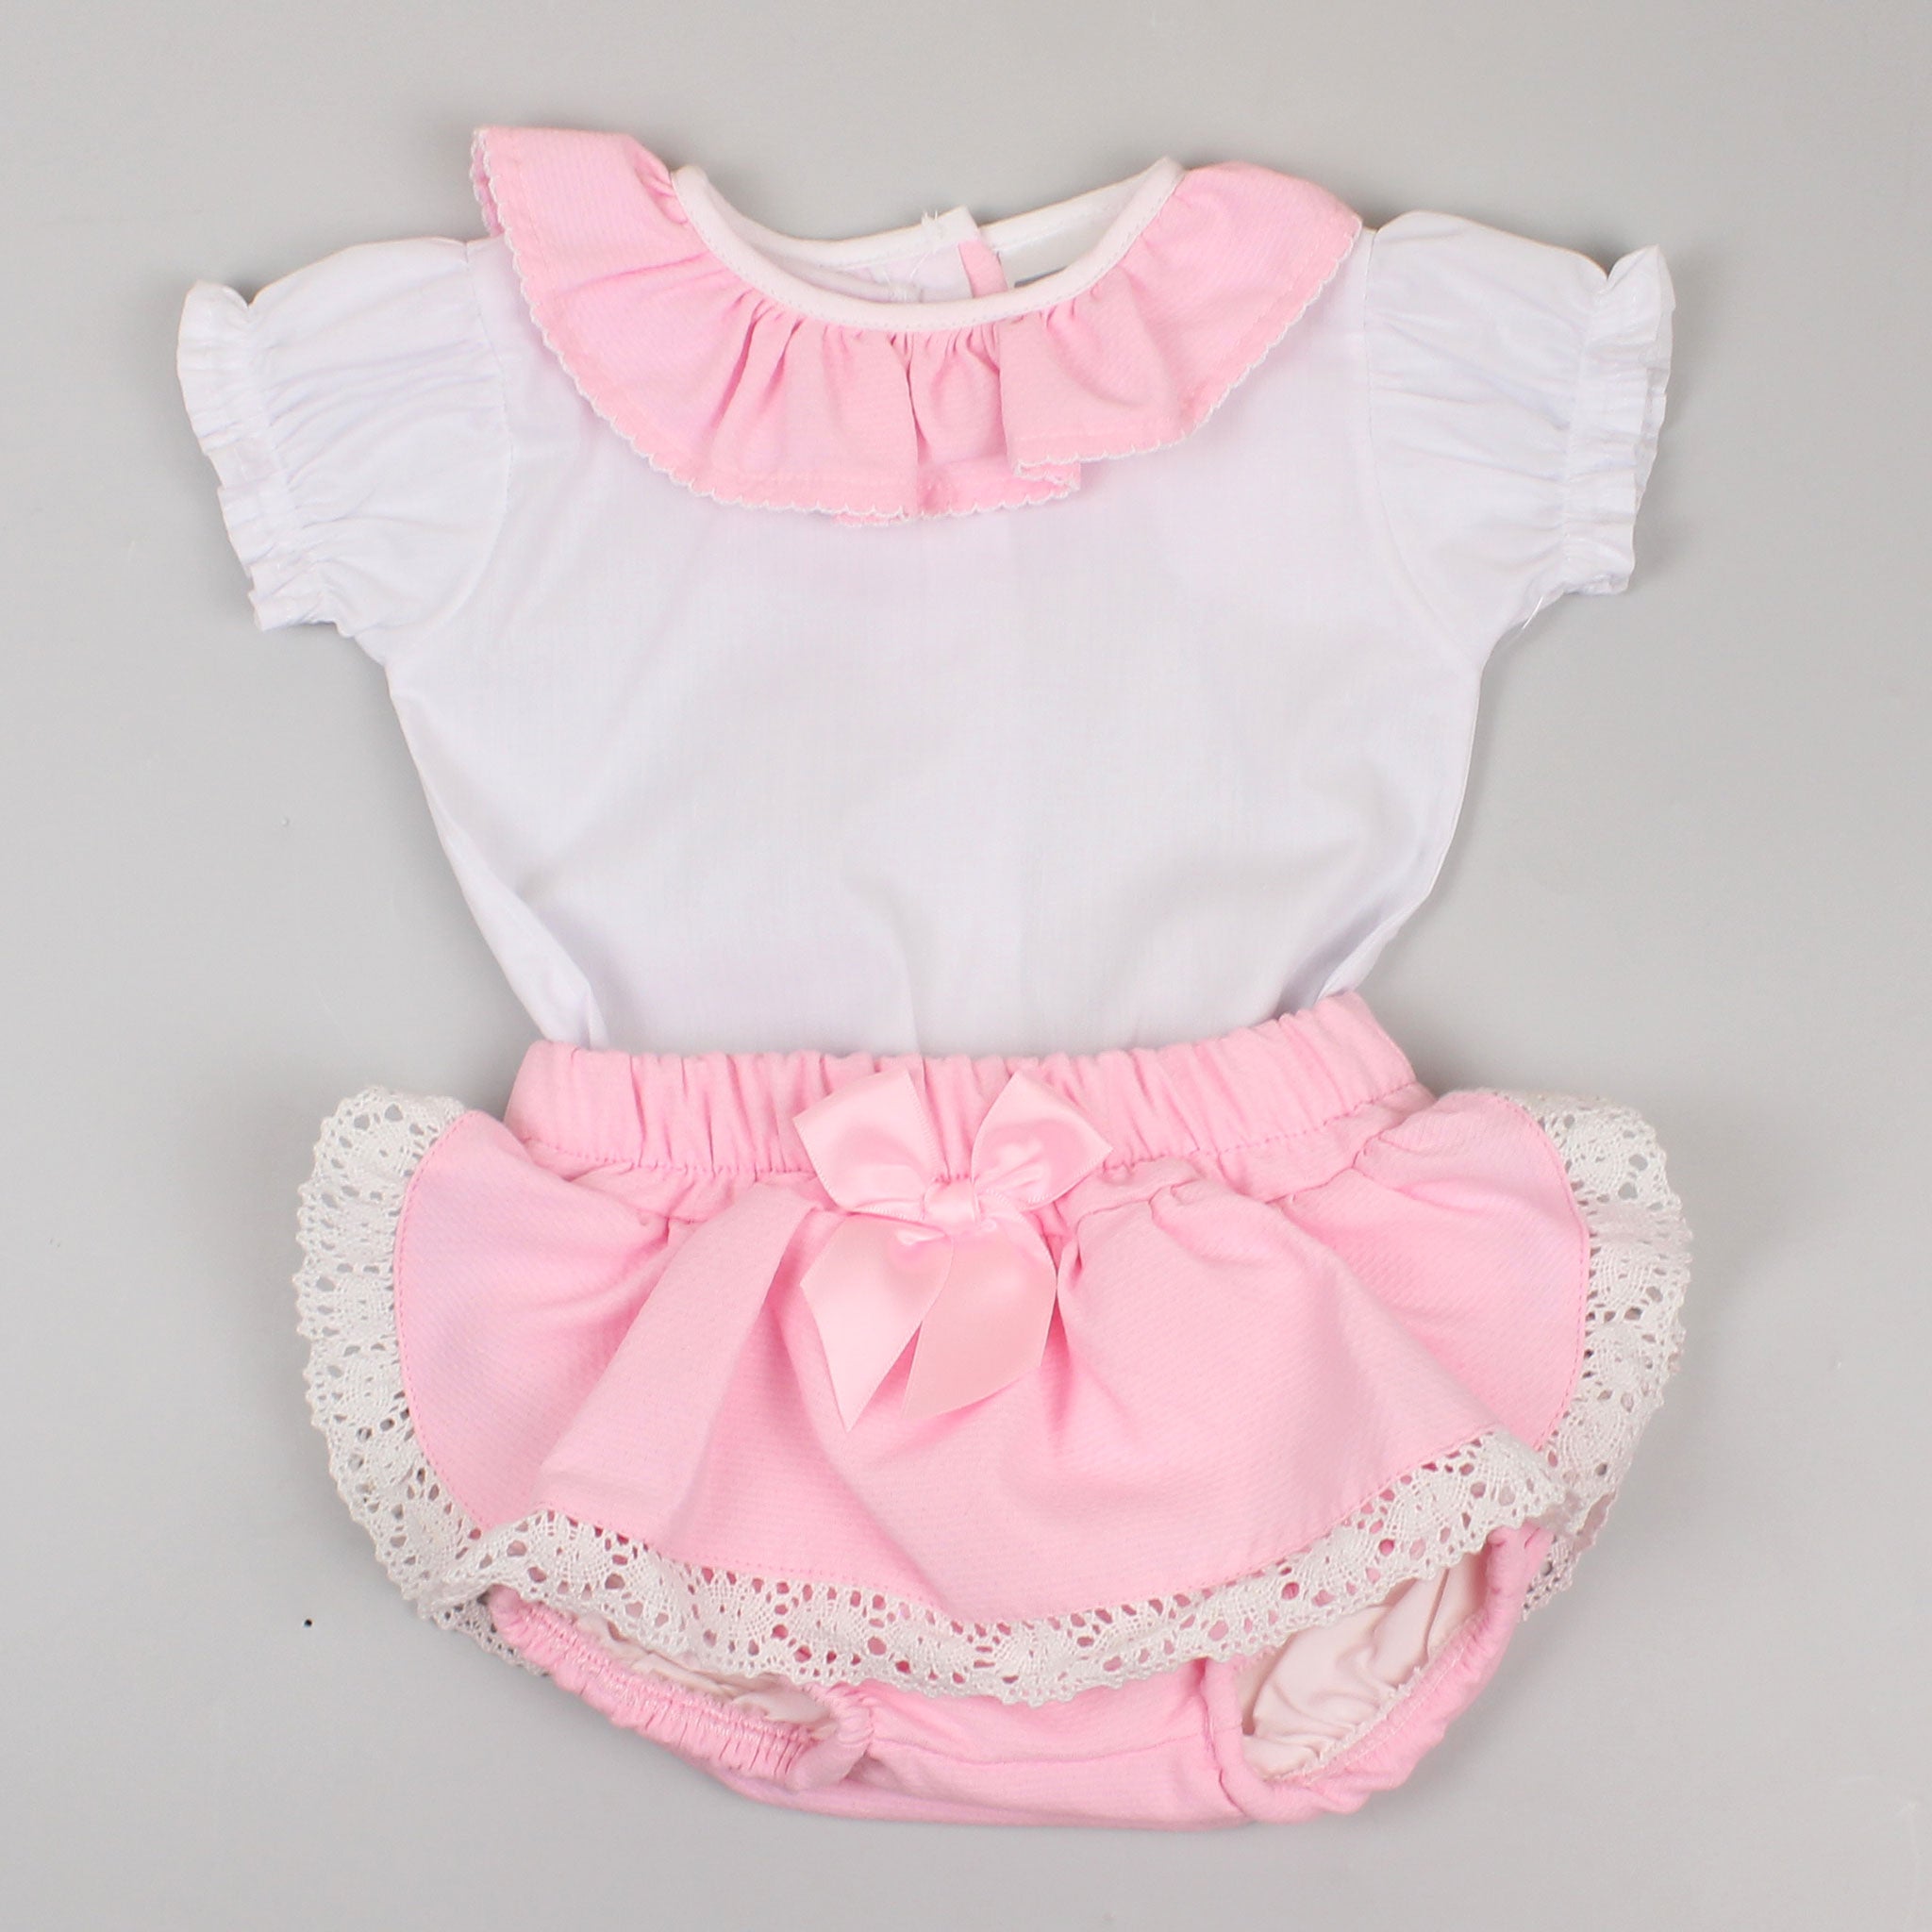 baby girls spanish style spring summer set outfit by Pex